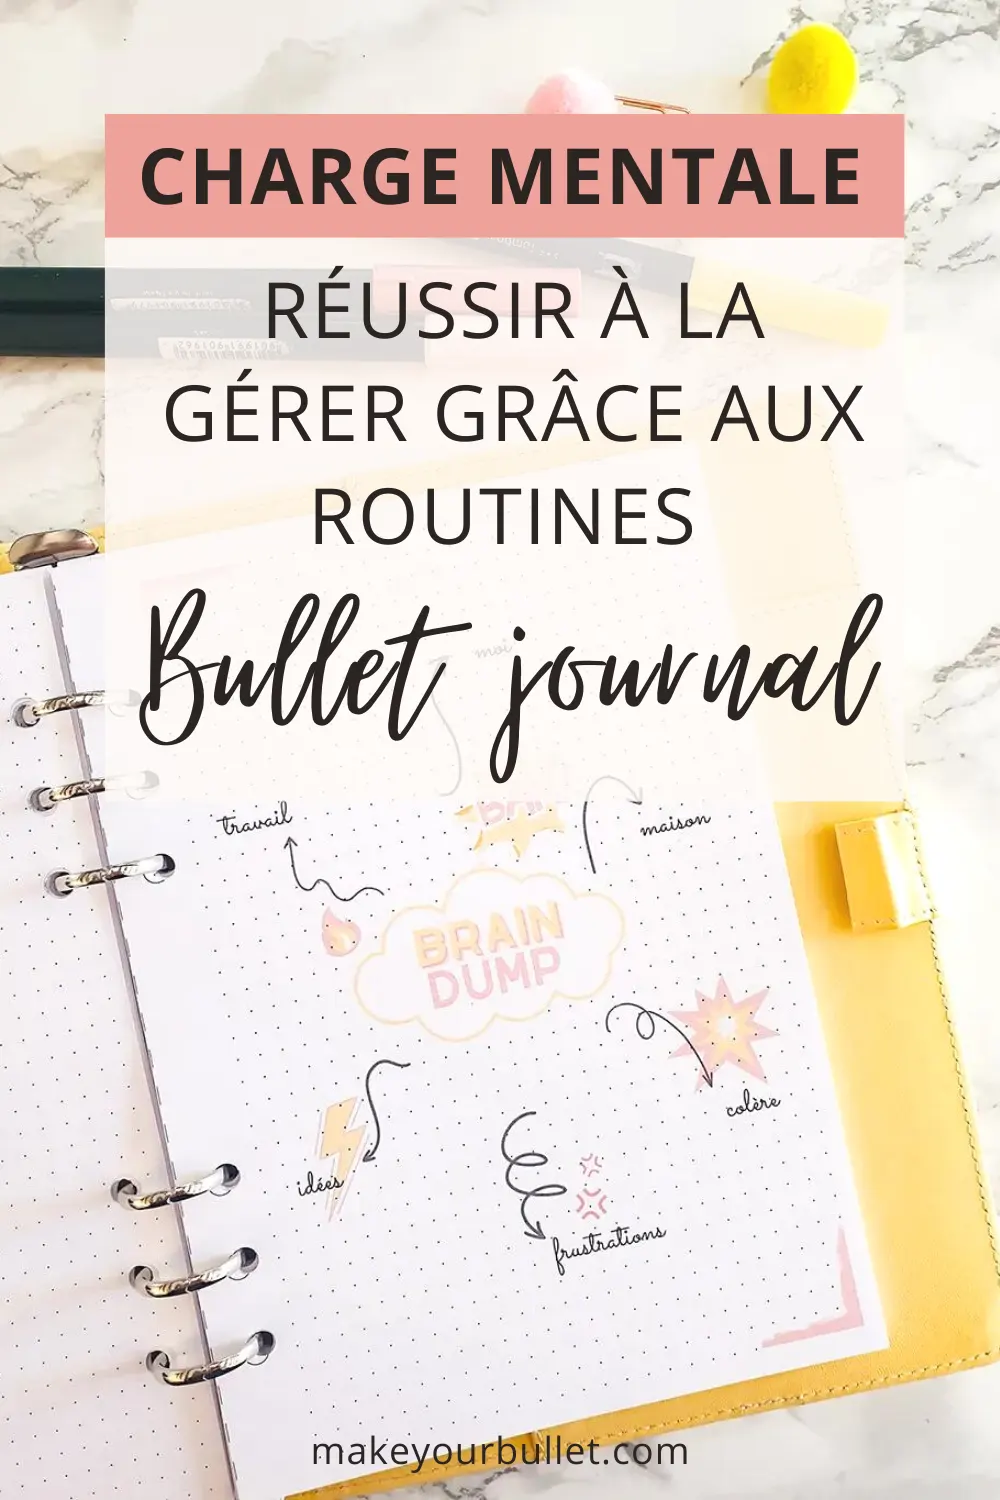 soulager-charge-mentale-bullet-journal